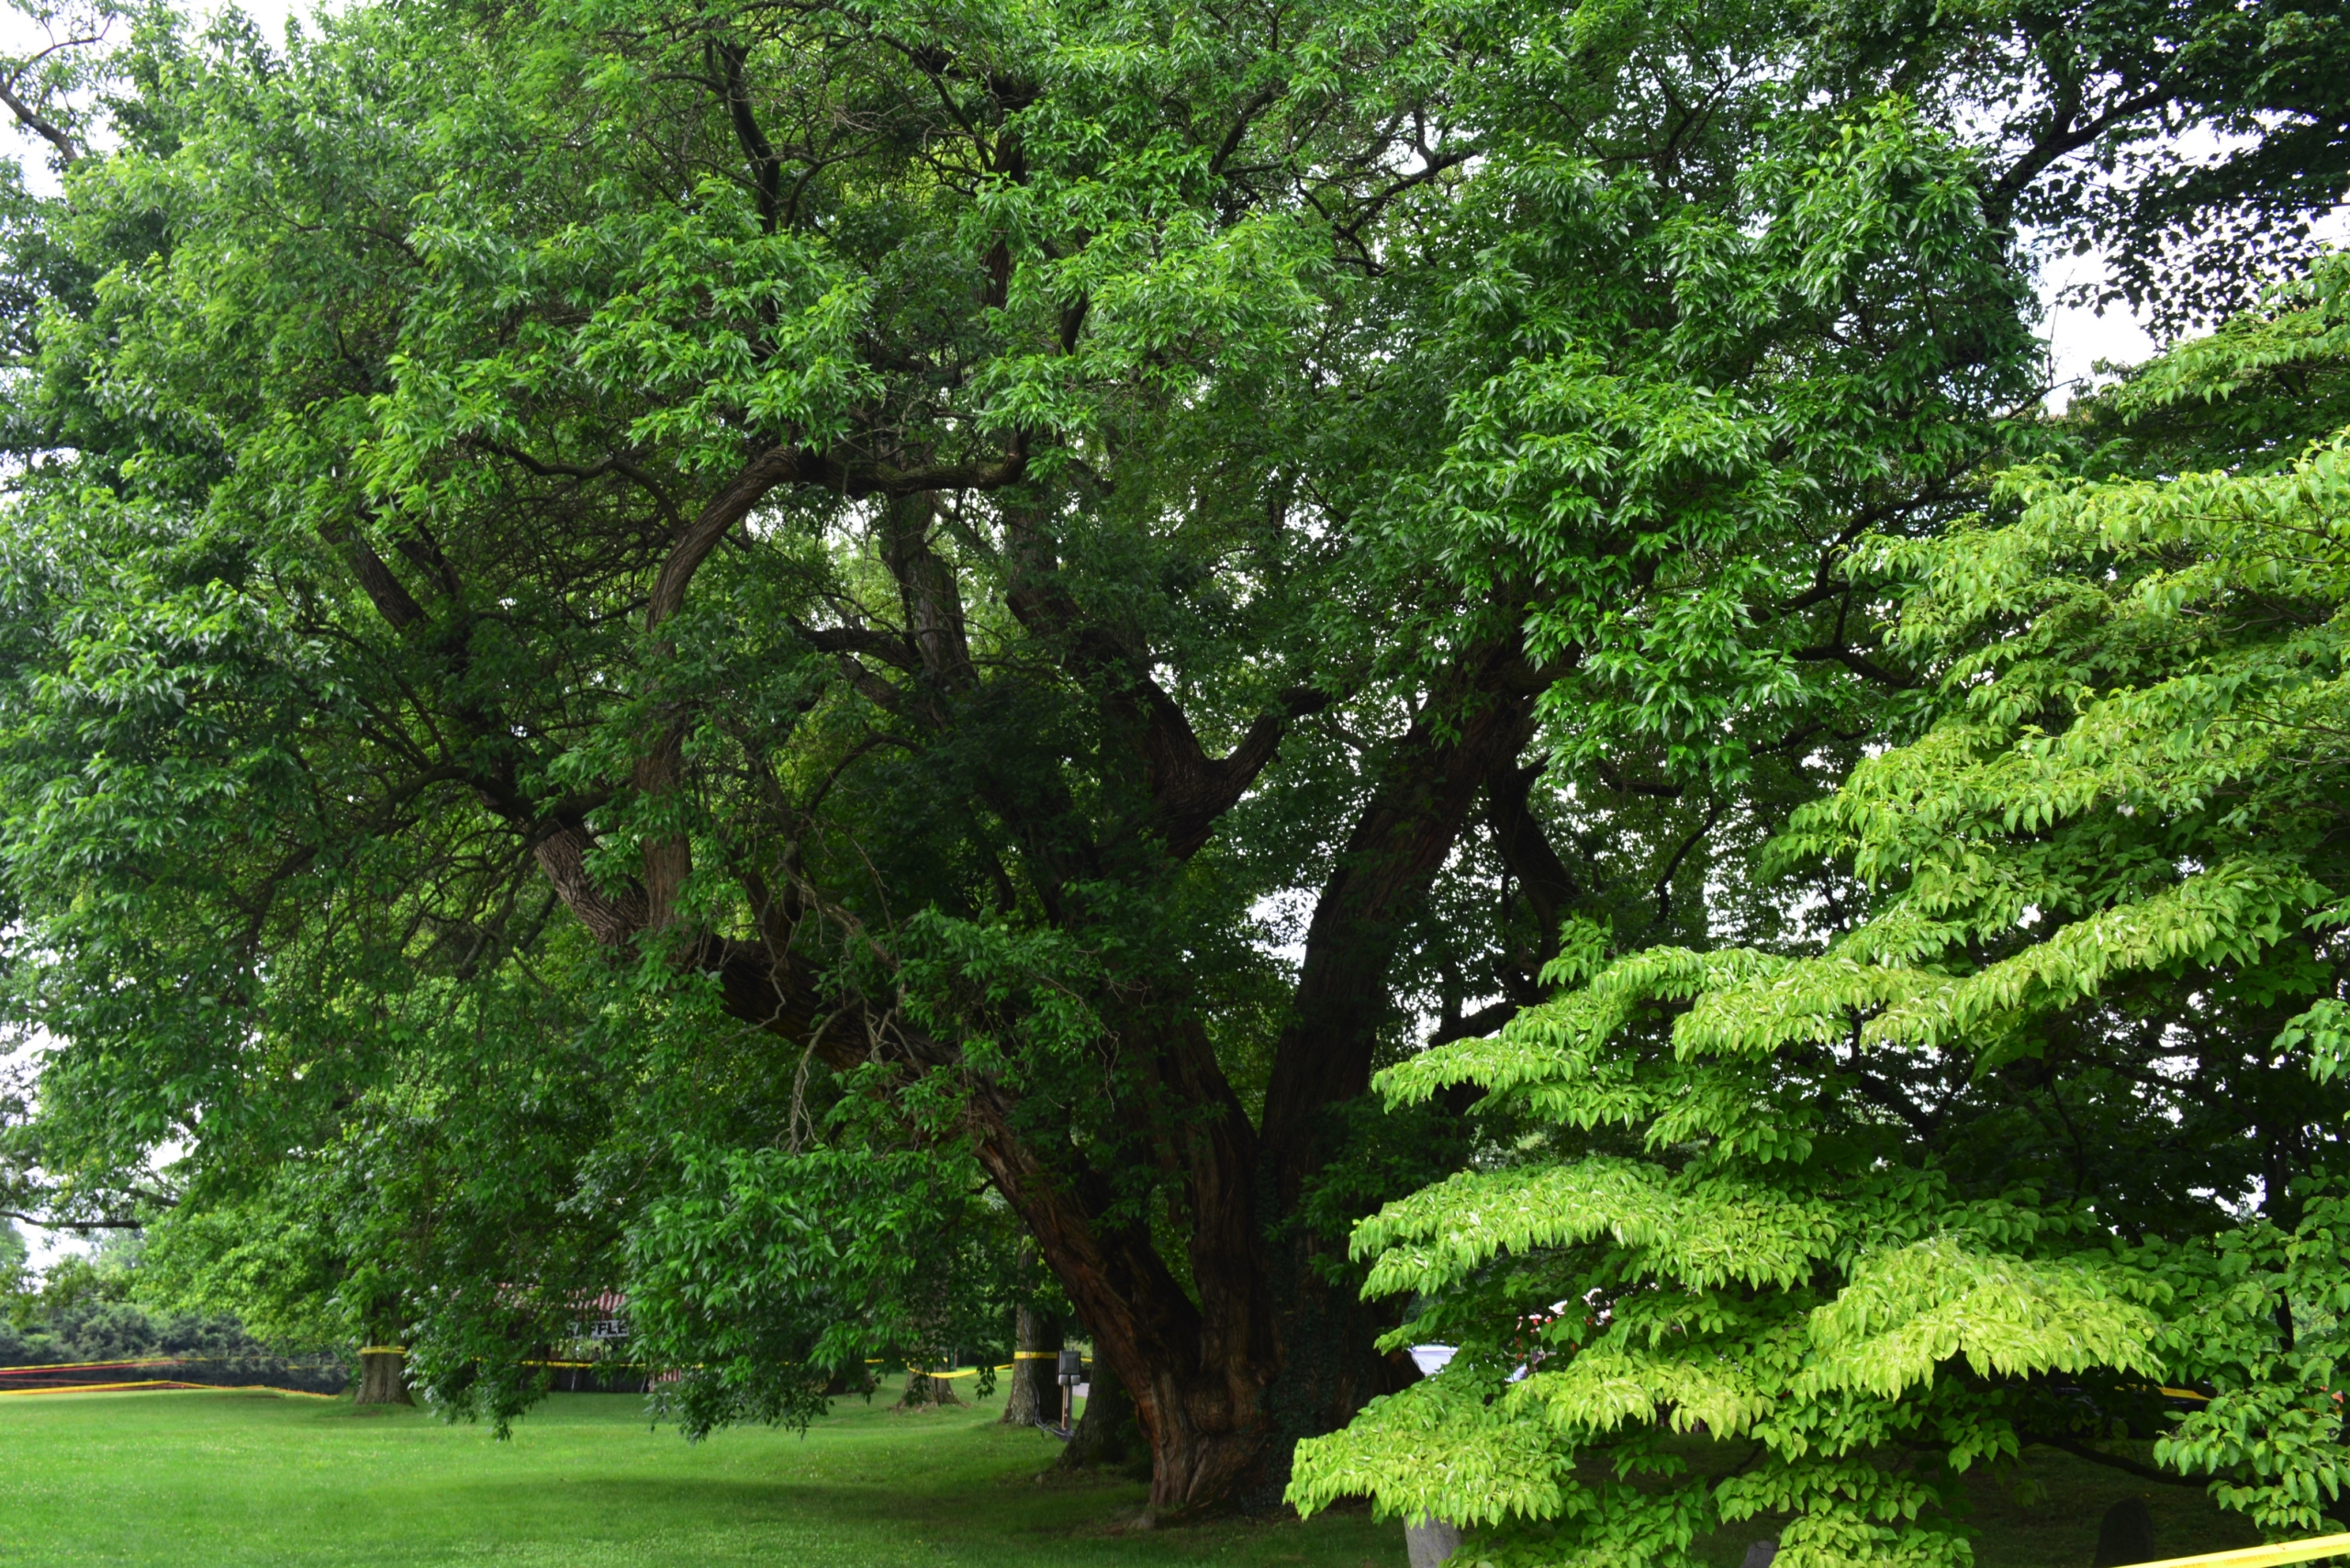 a large tree branches reaching out across a green lawn